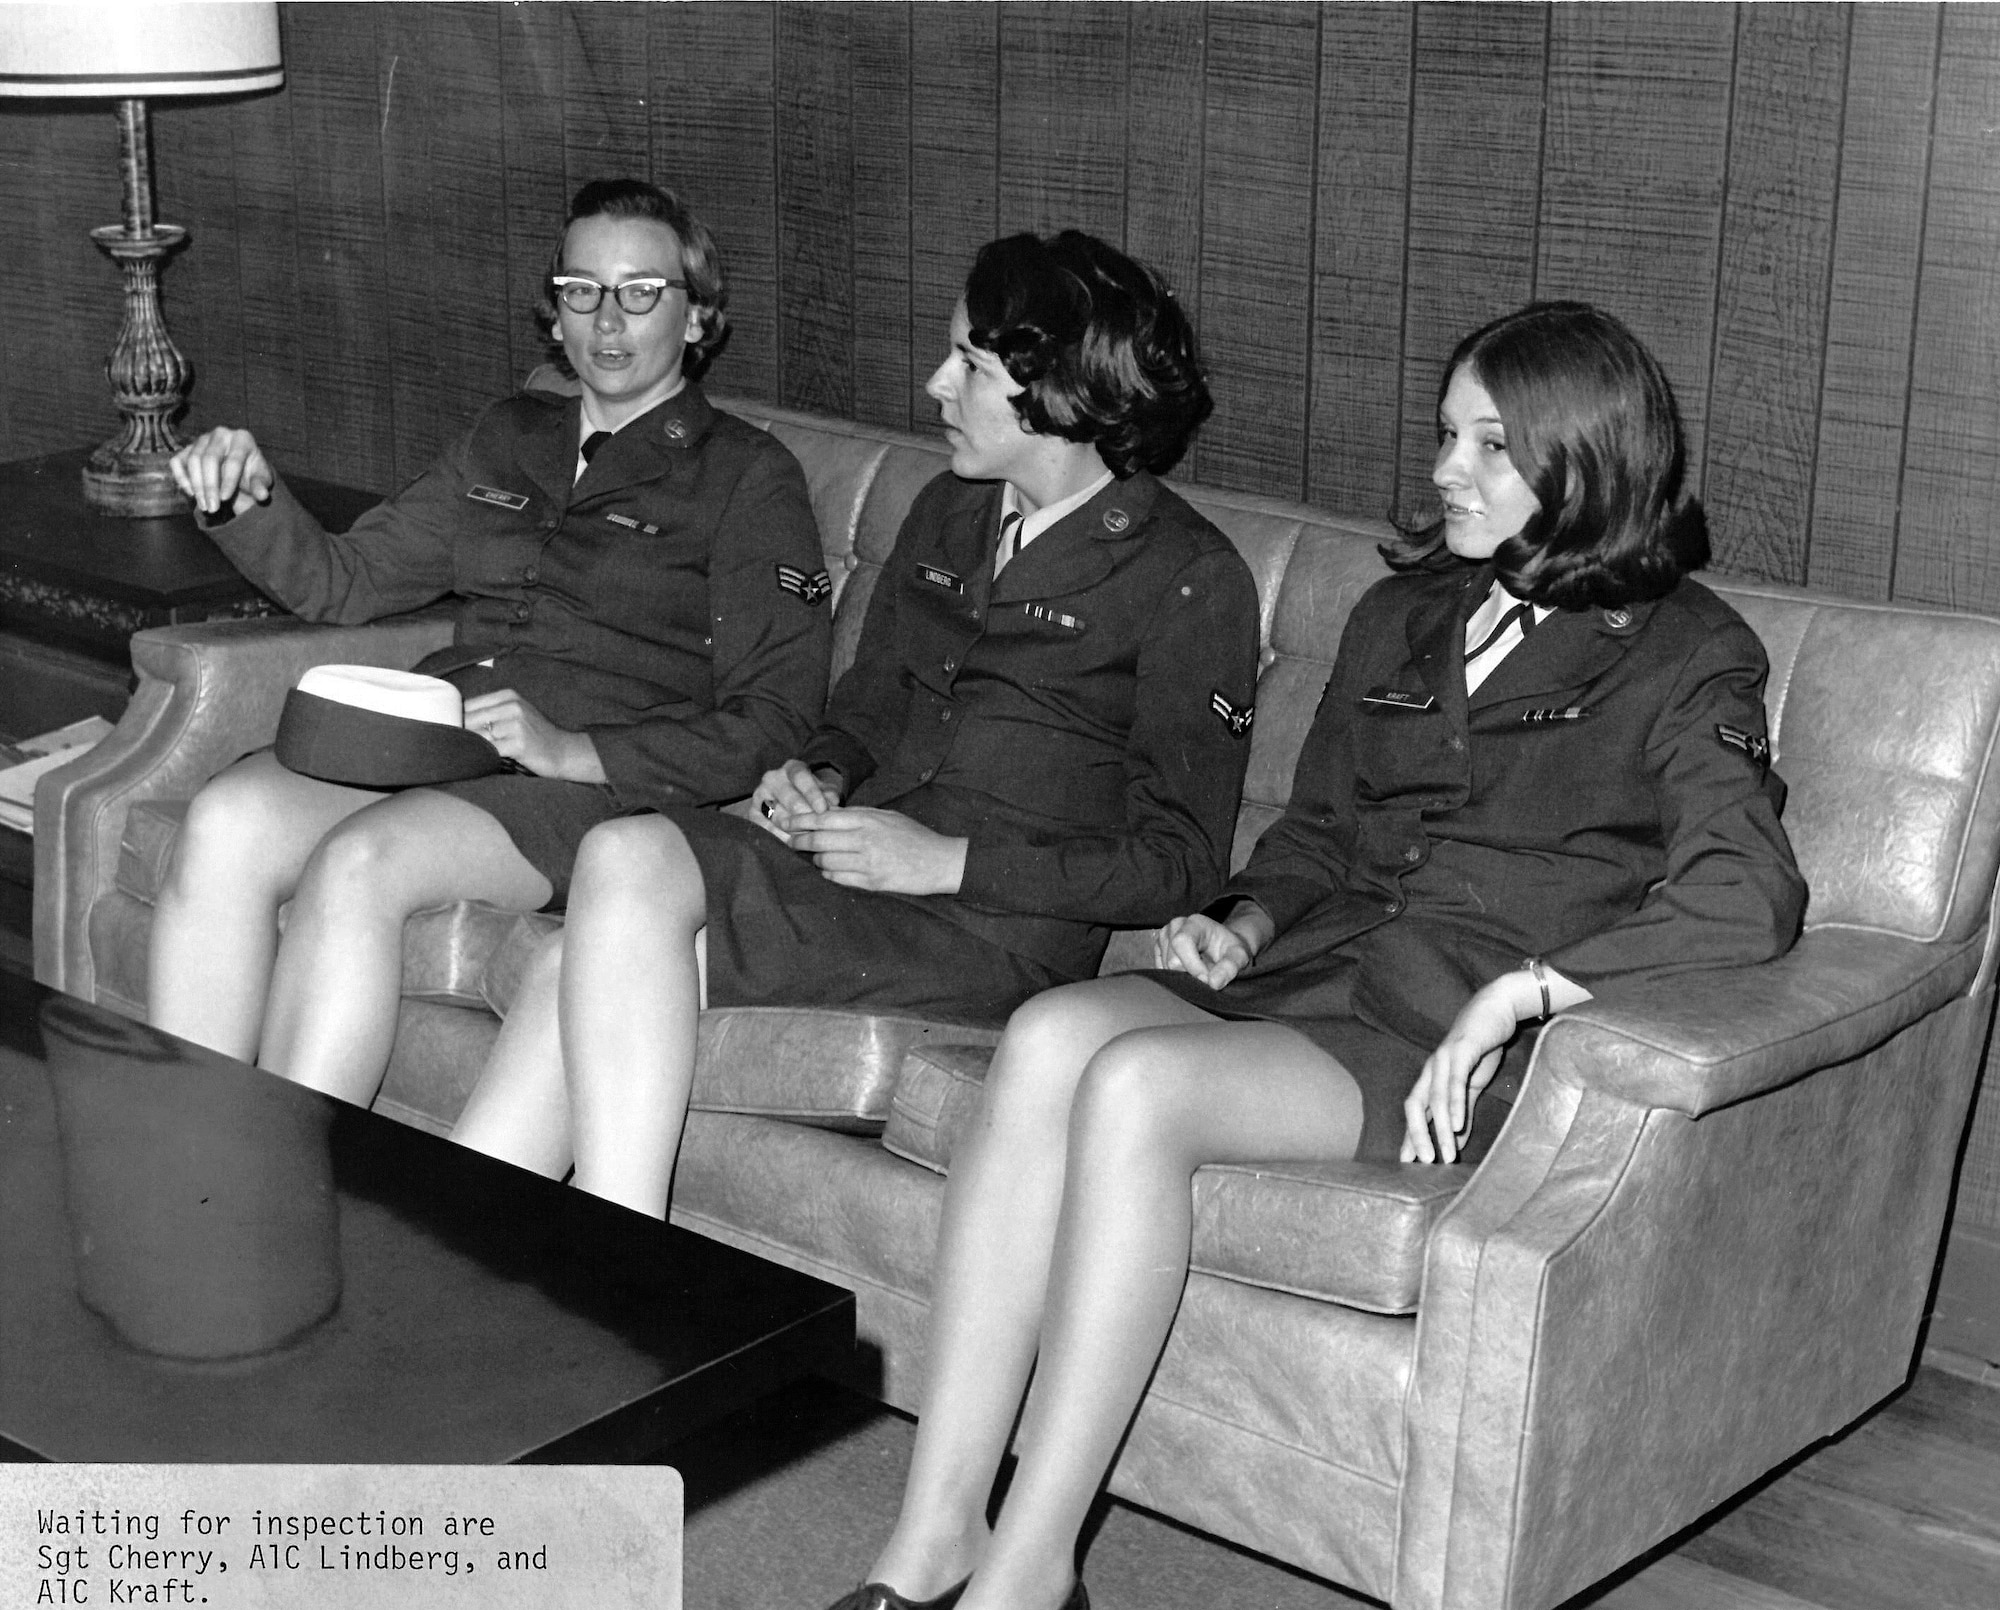 Sgt. Lucis A. Cherry, Airman 1st Class P. Linberg and Airman 1st Class A. Kraft, wait for inspection during leadership school. The airmen were among 22 Women in the Air Force, or WAFs, in 1970 at the I.G. Brown Training and Education Center on McGhee Tyson Air National Guard Base in Louisville, Tenn. (U.S. Air National Guard photo)
